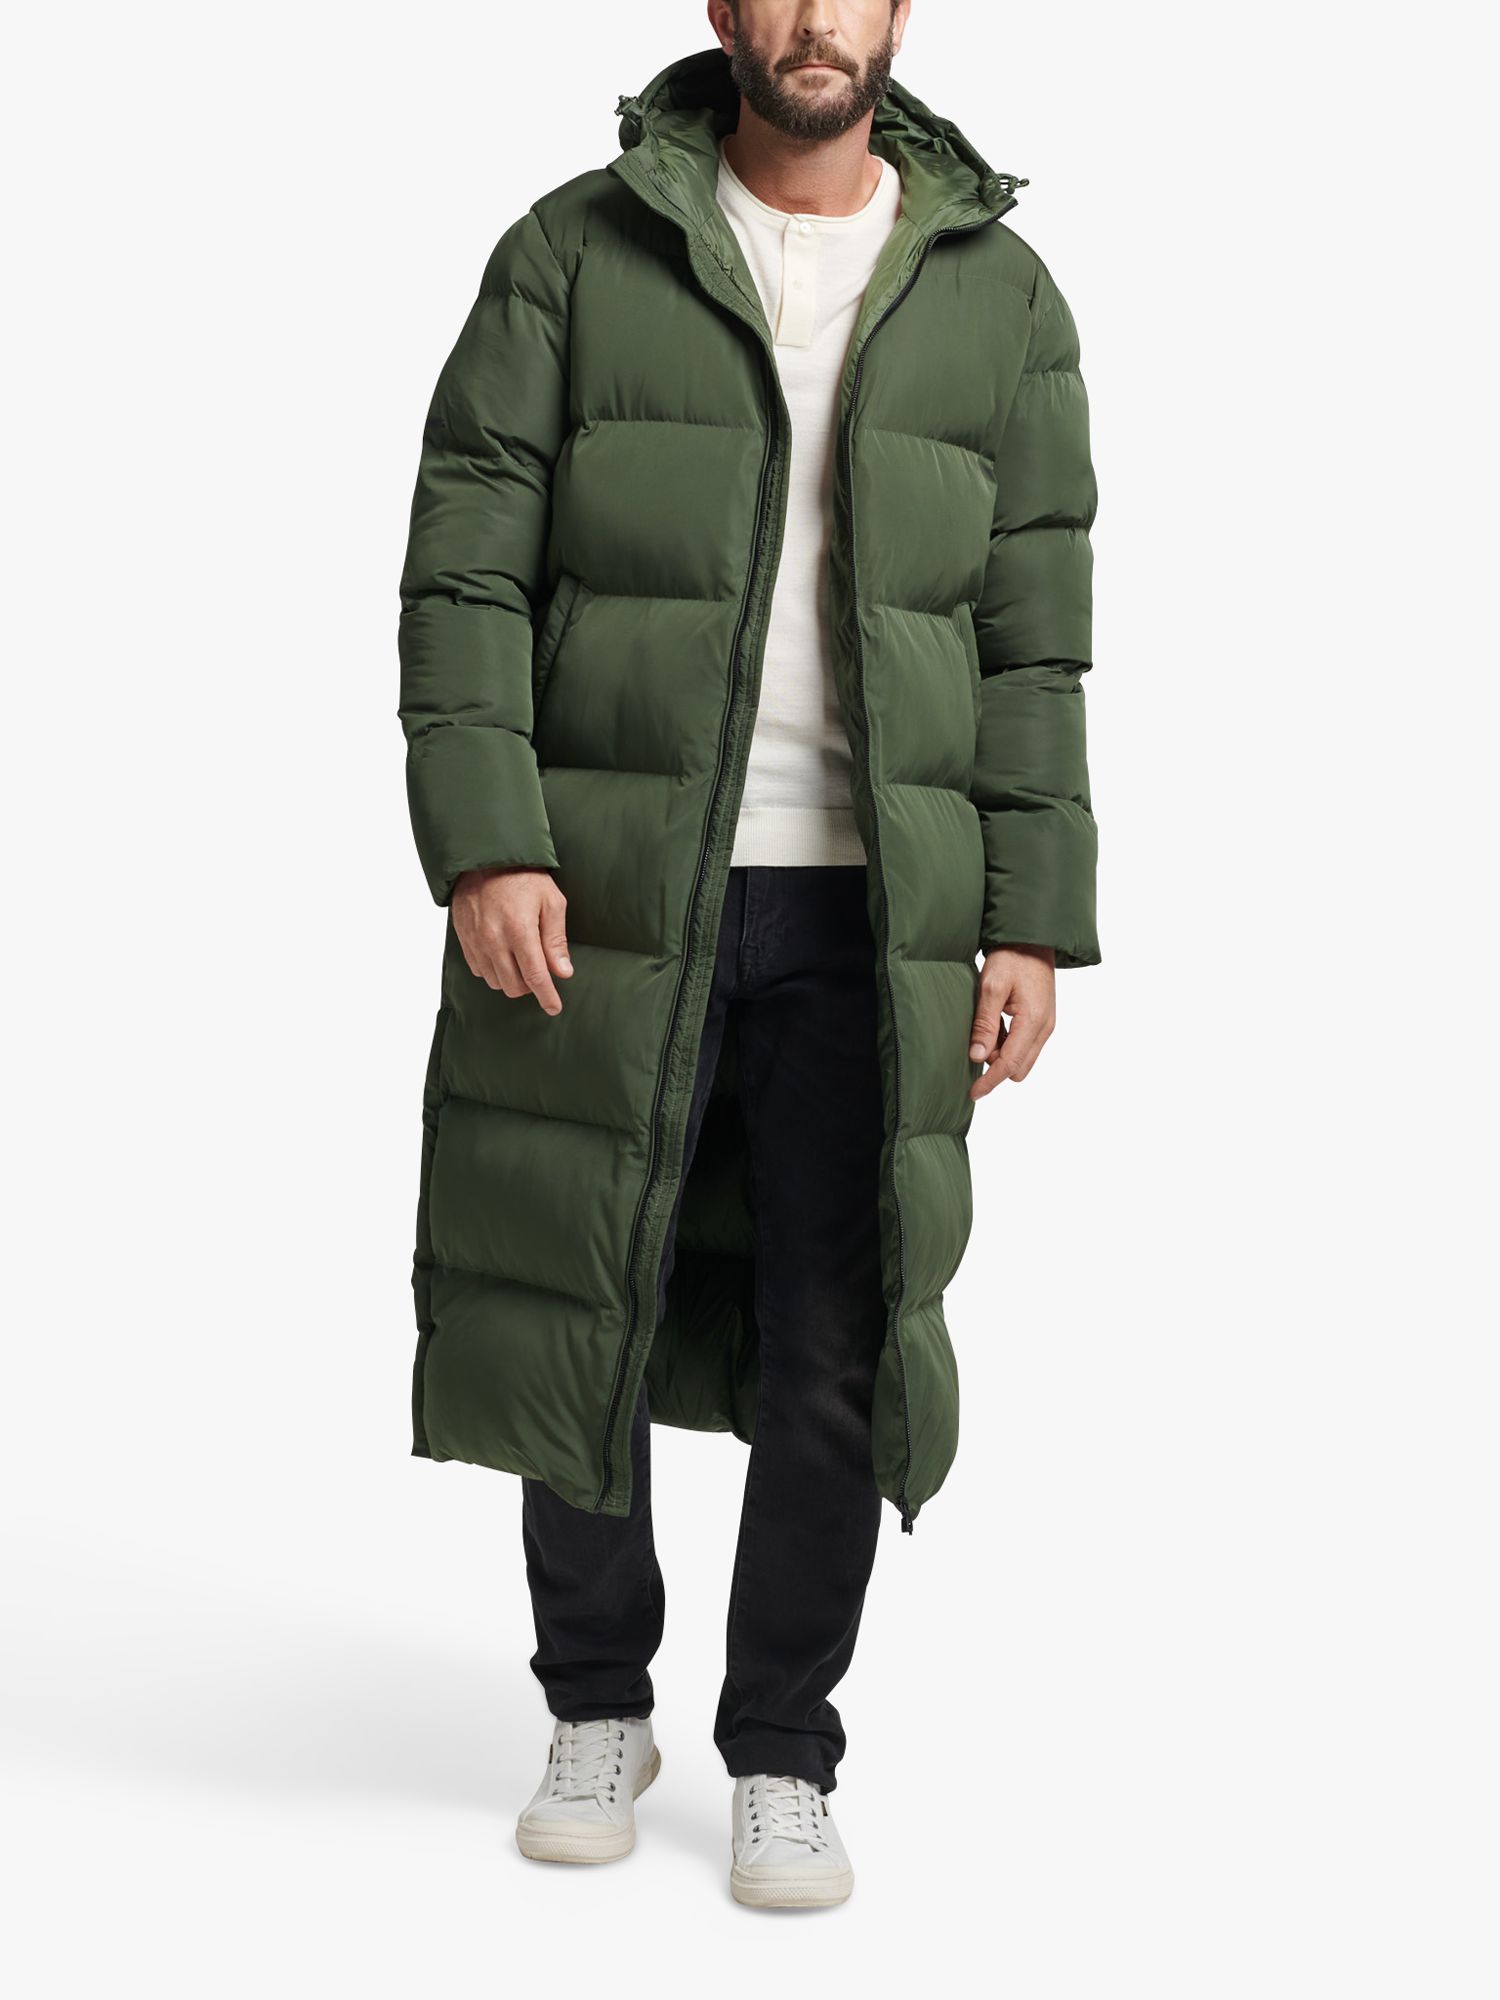 Superdry Extra Long Hooded Puffer Coat, Duffle Bag, S